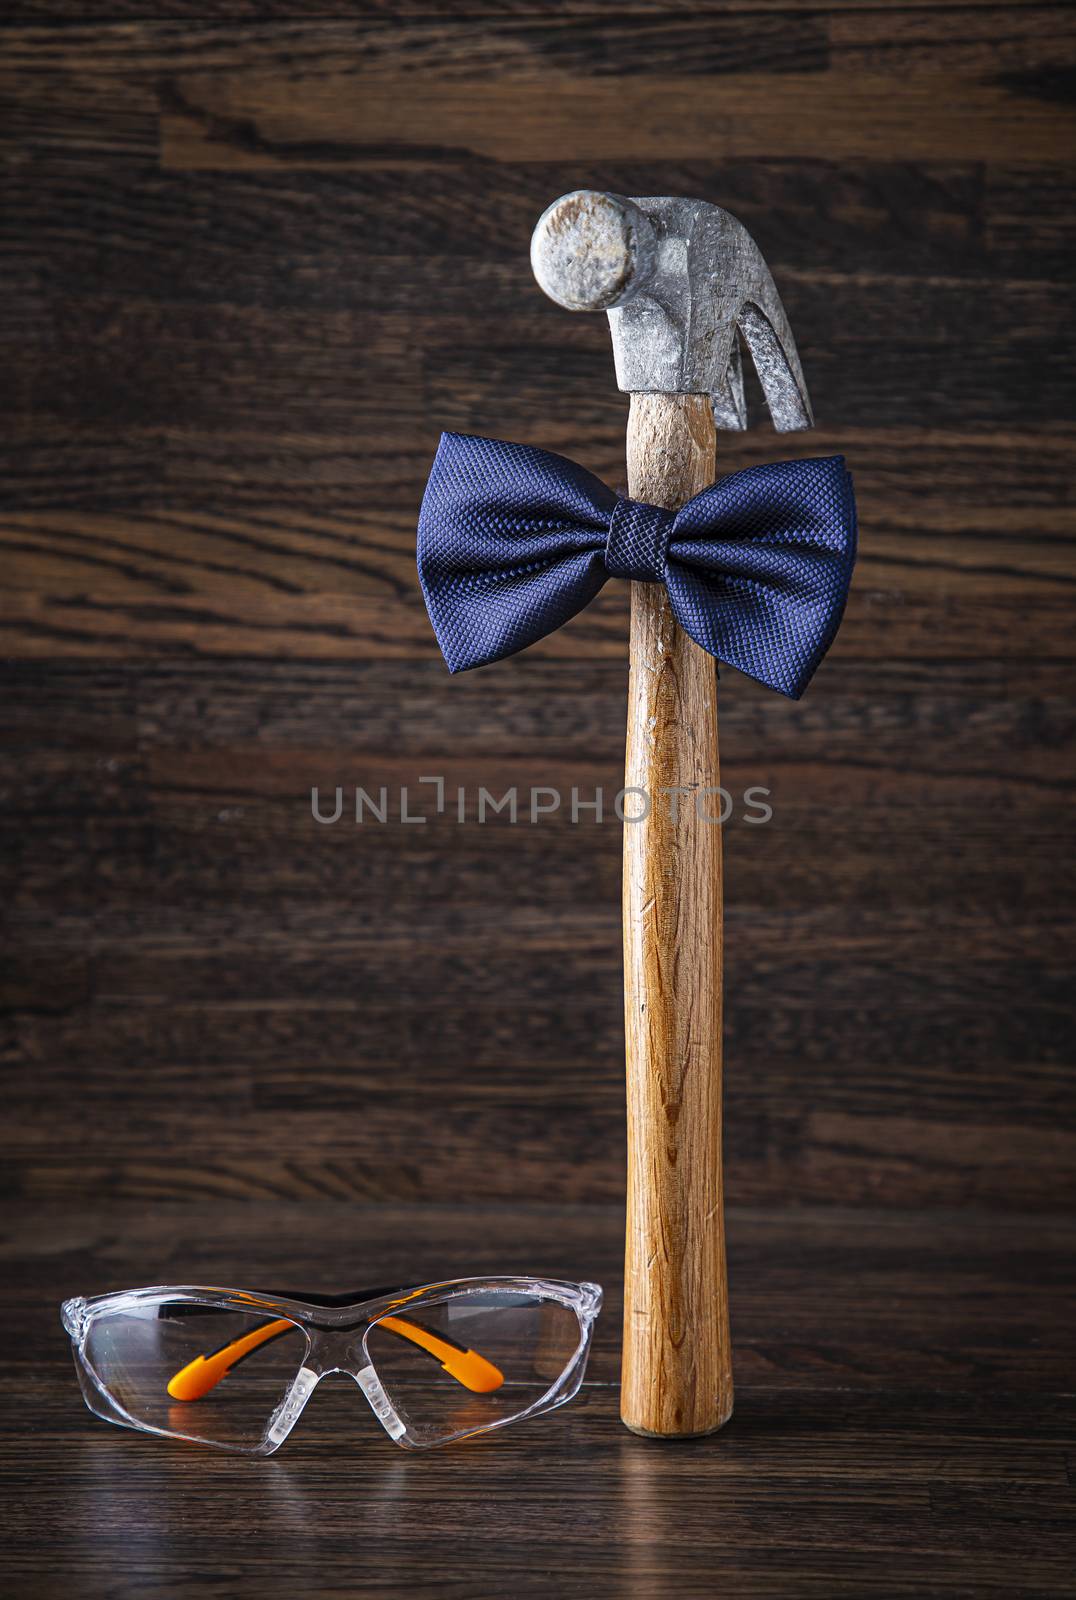 Old weather hammer wearing a blue bowtie, with protective glasses on it’s side against a dark wood background